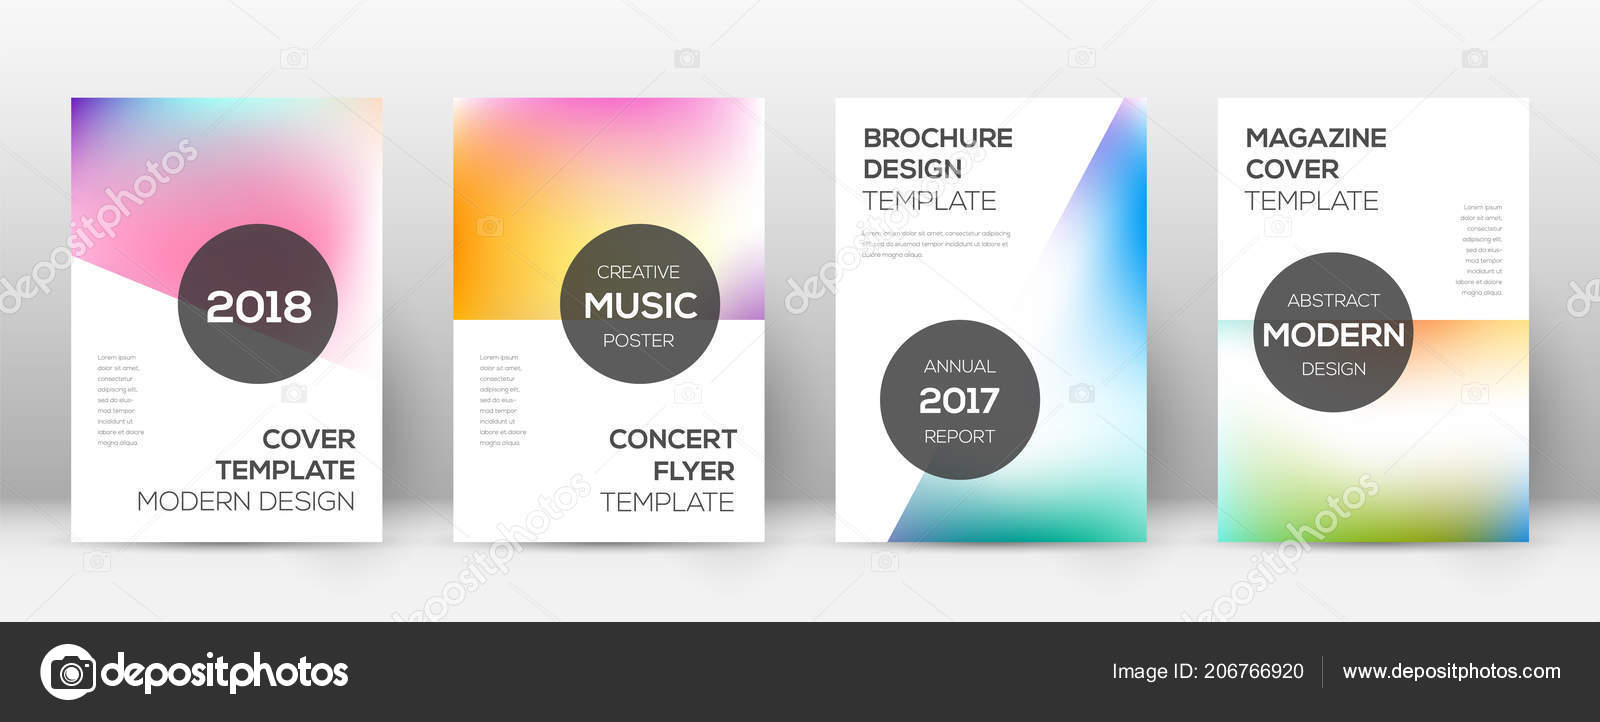 Flyer Layout Modern Quaint Template For Brochure Annual Report Magazine Poster Corporate Stock Vector C Doozydo